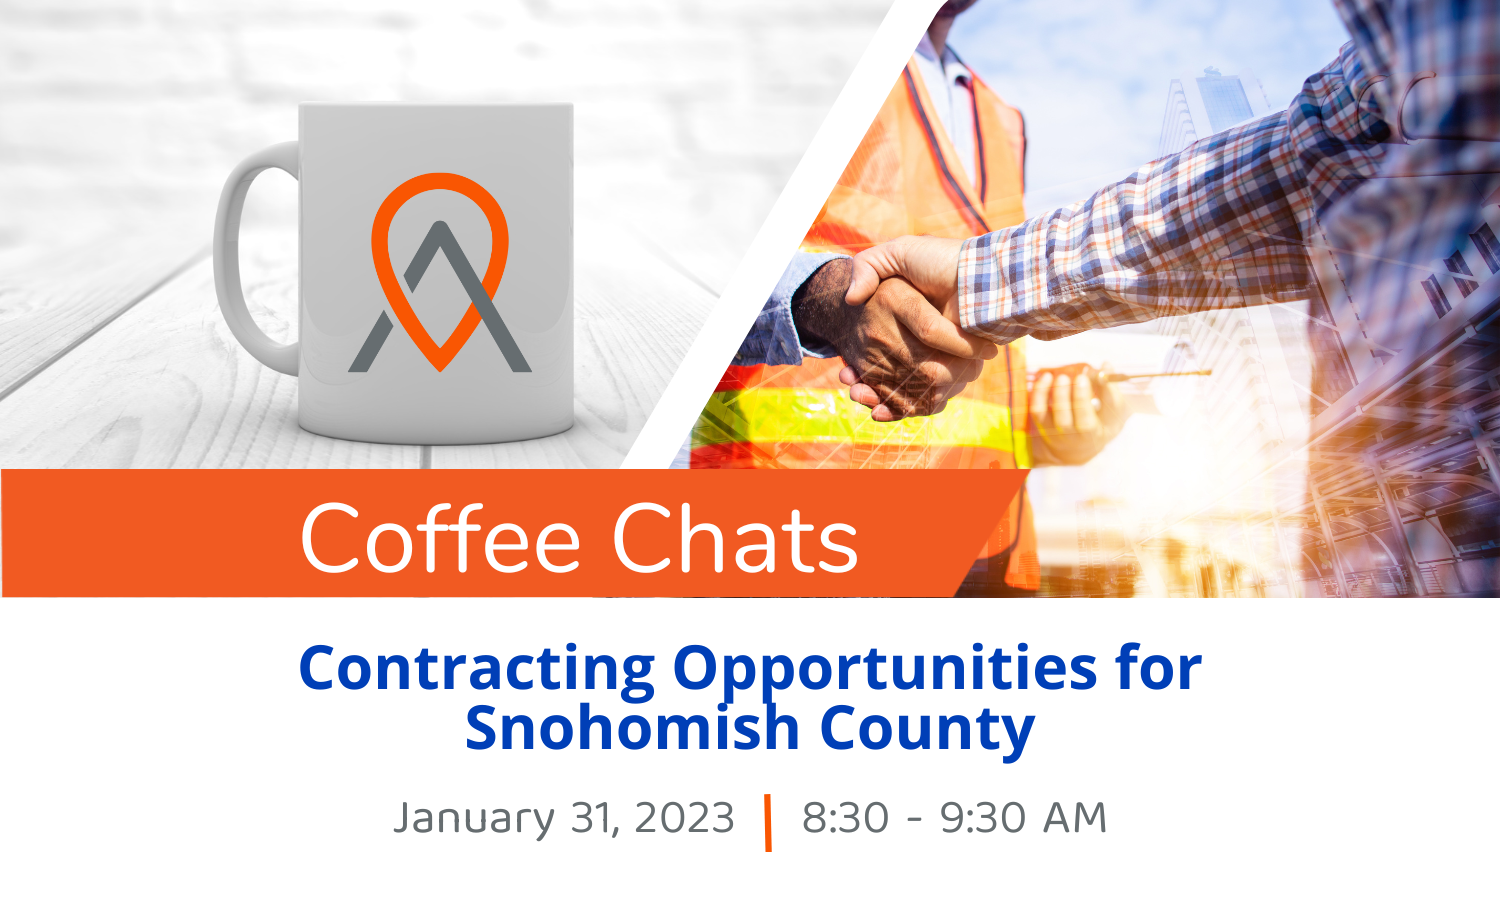 Event Promo Photo For Coffee Chats - Contracting Opportunities for Snohomish County